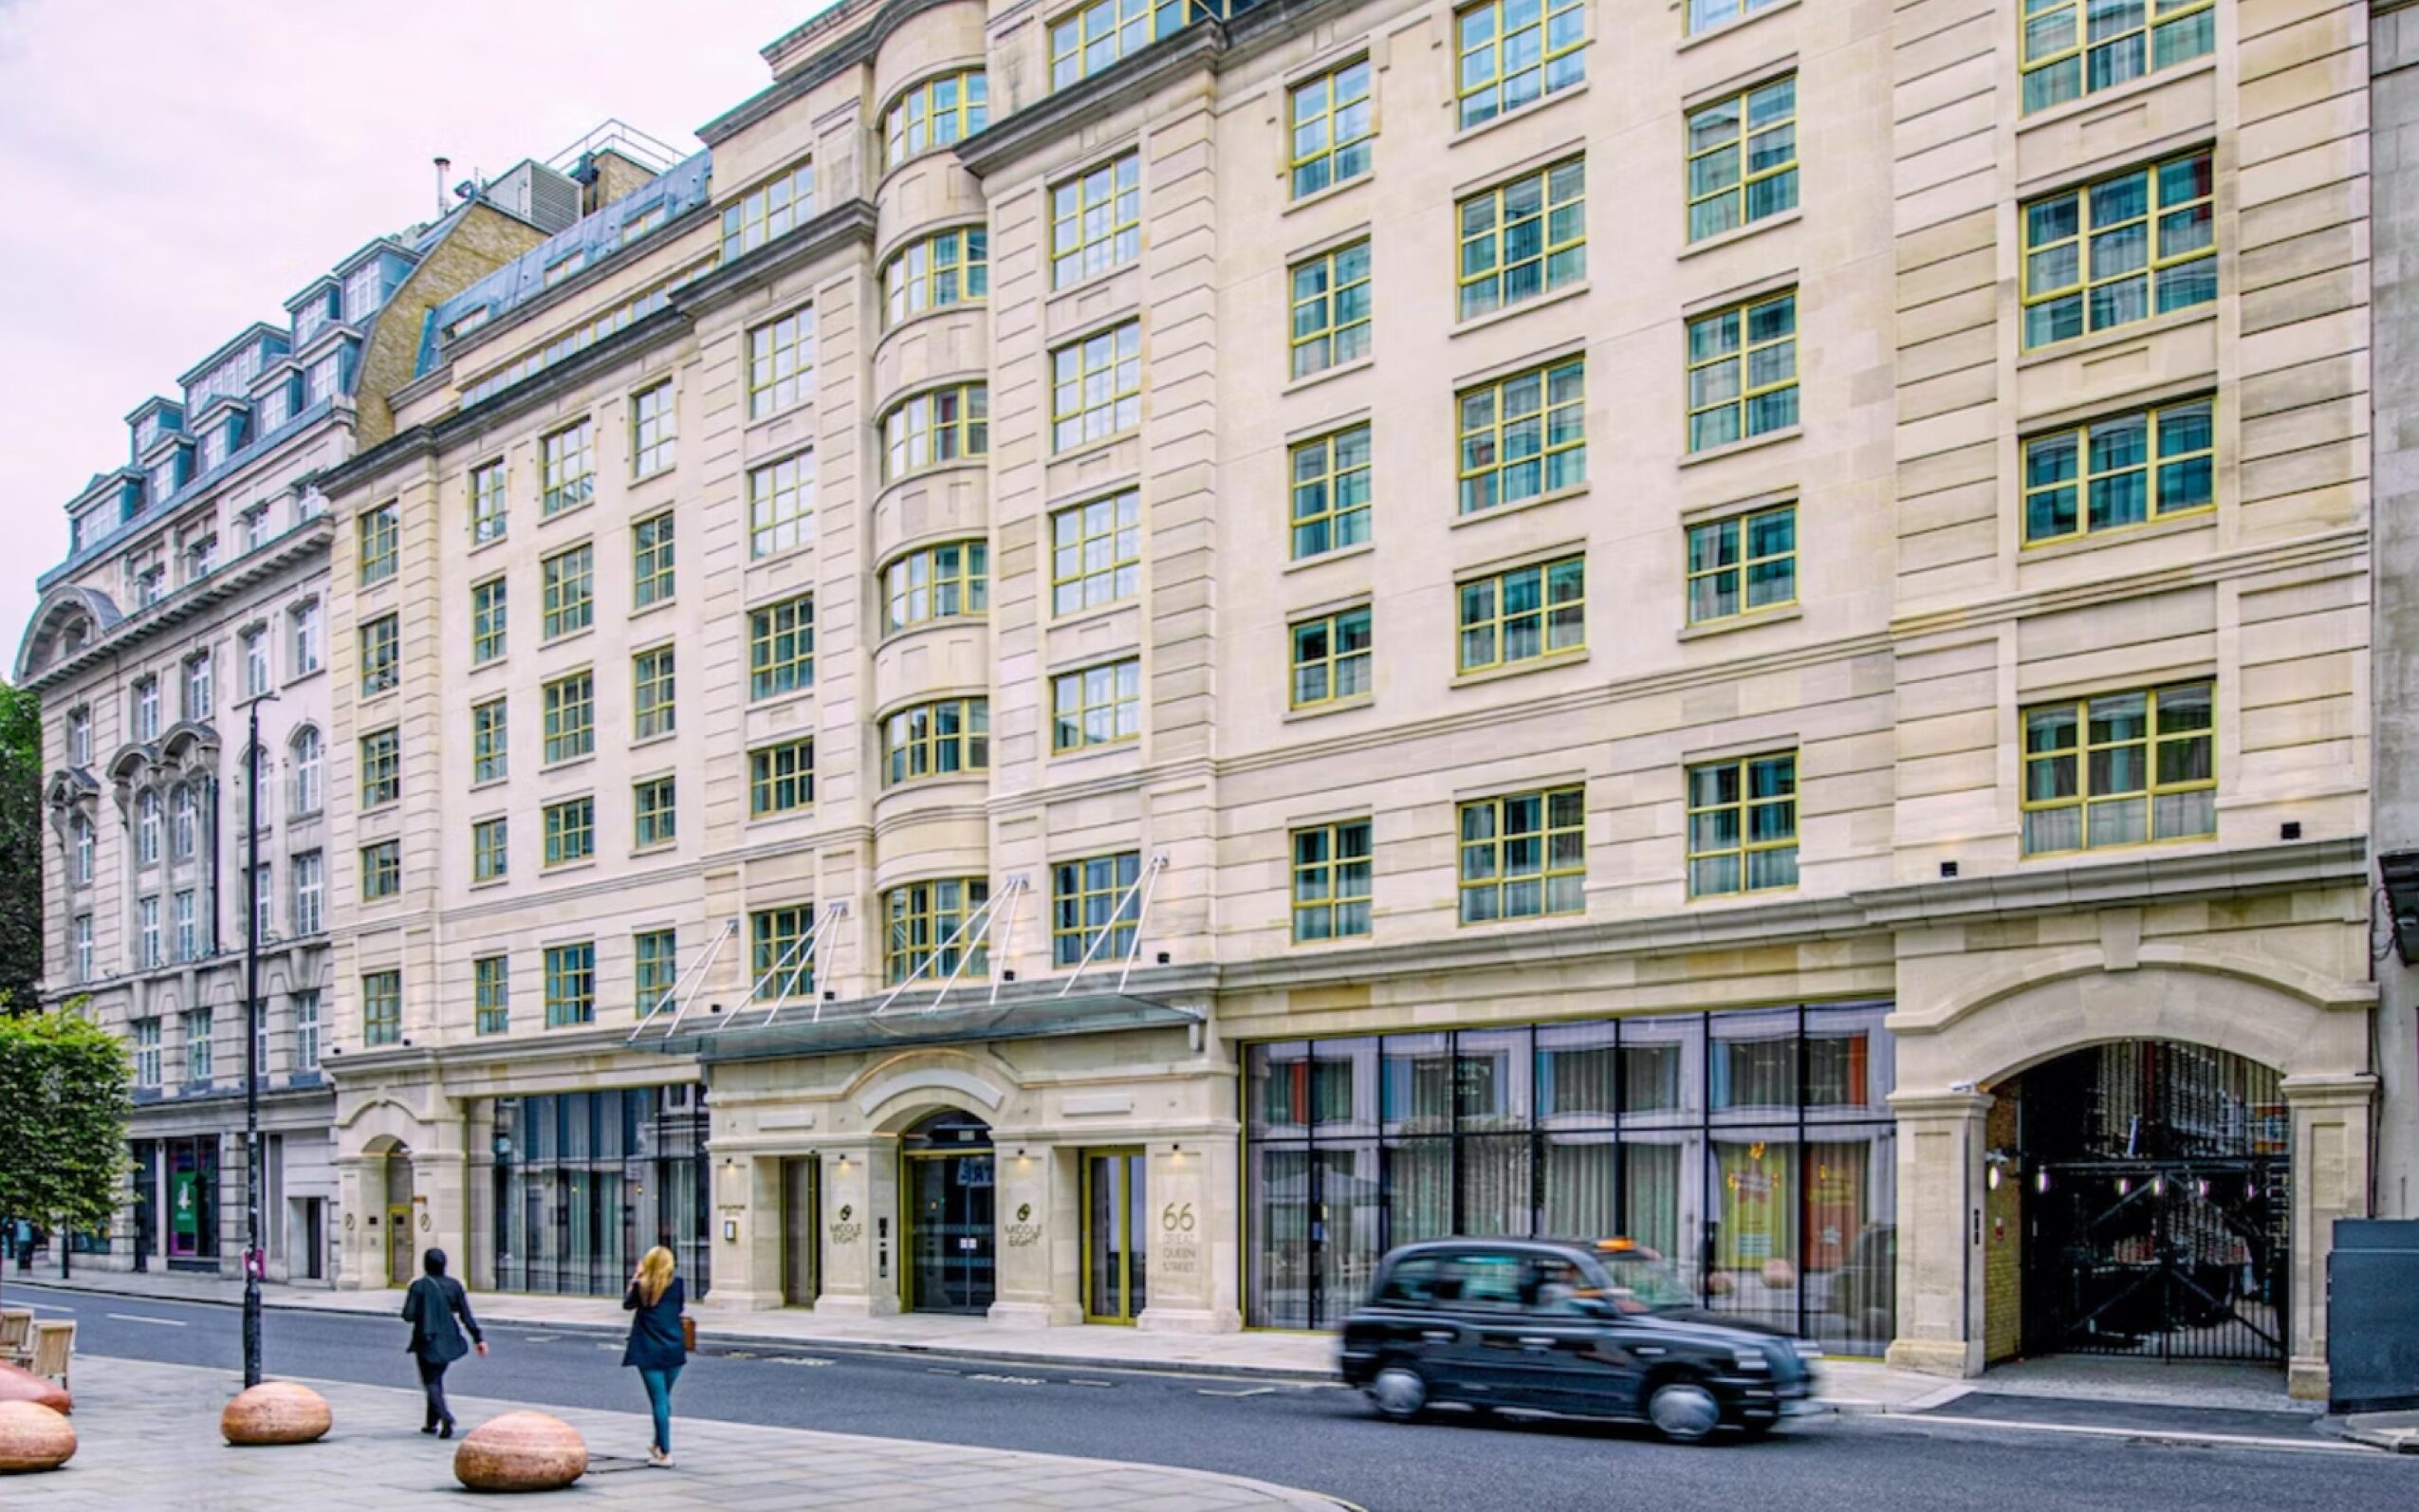 The Middle Eight Hotel is Located In London’s Popular Covent Garden